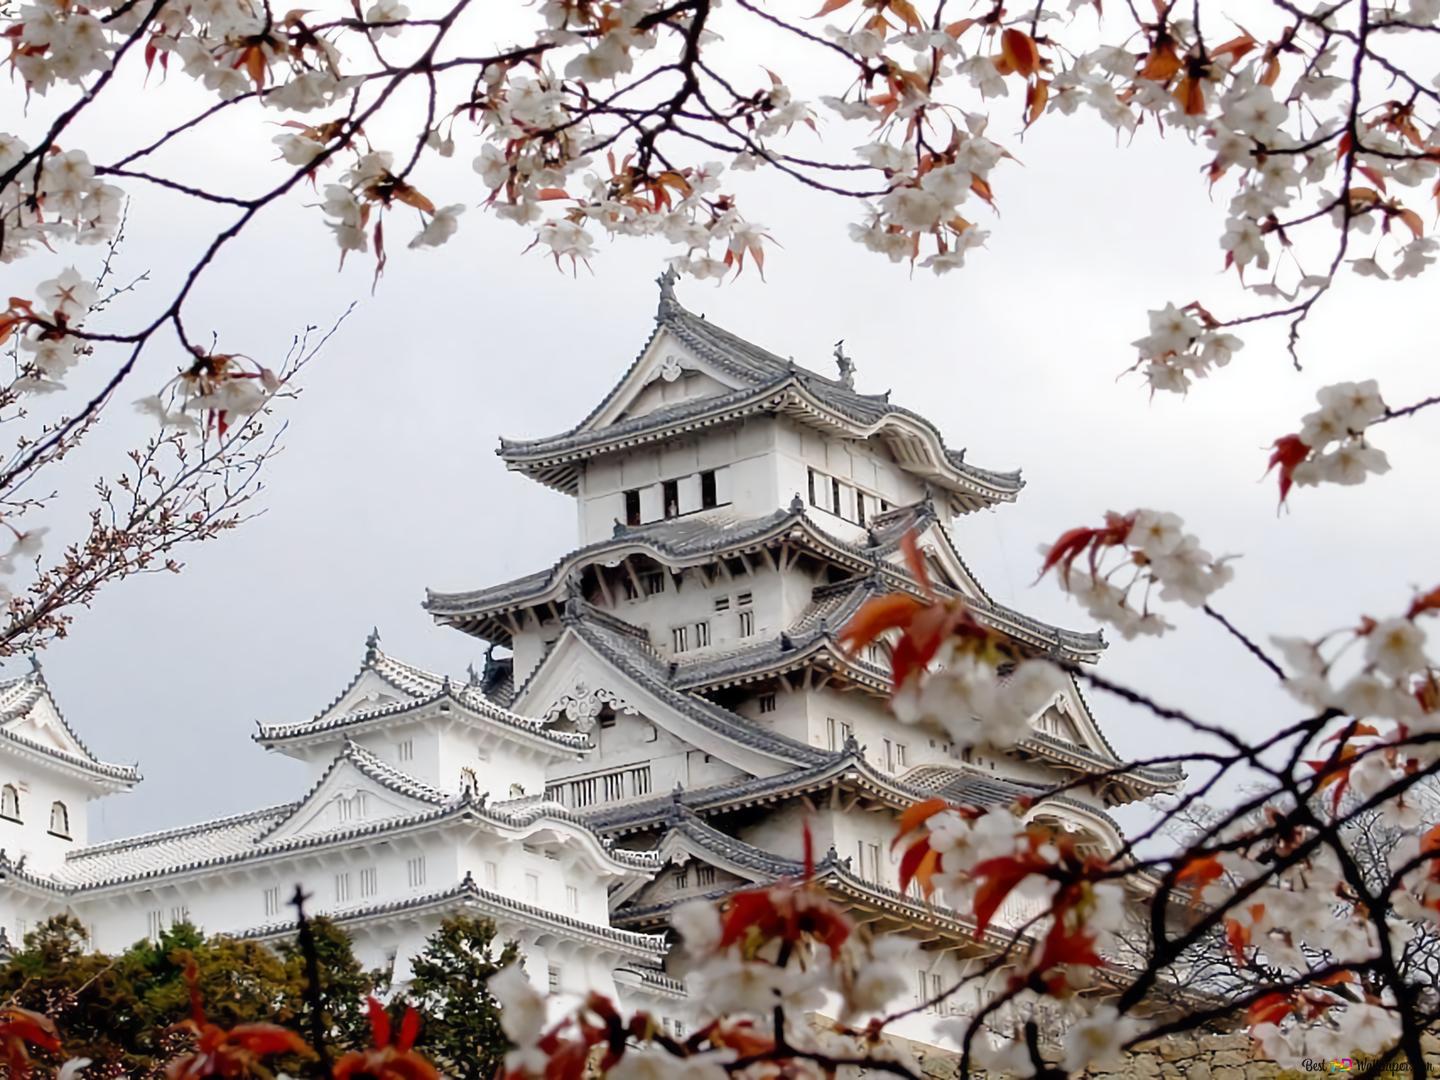 A large white building with trees in the background - Japan